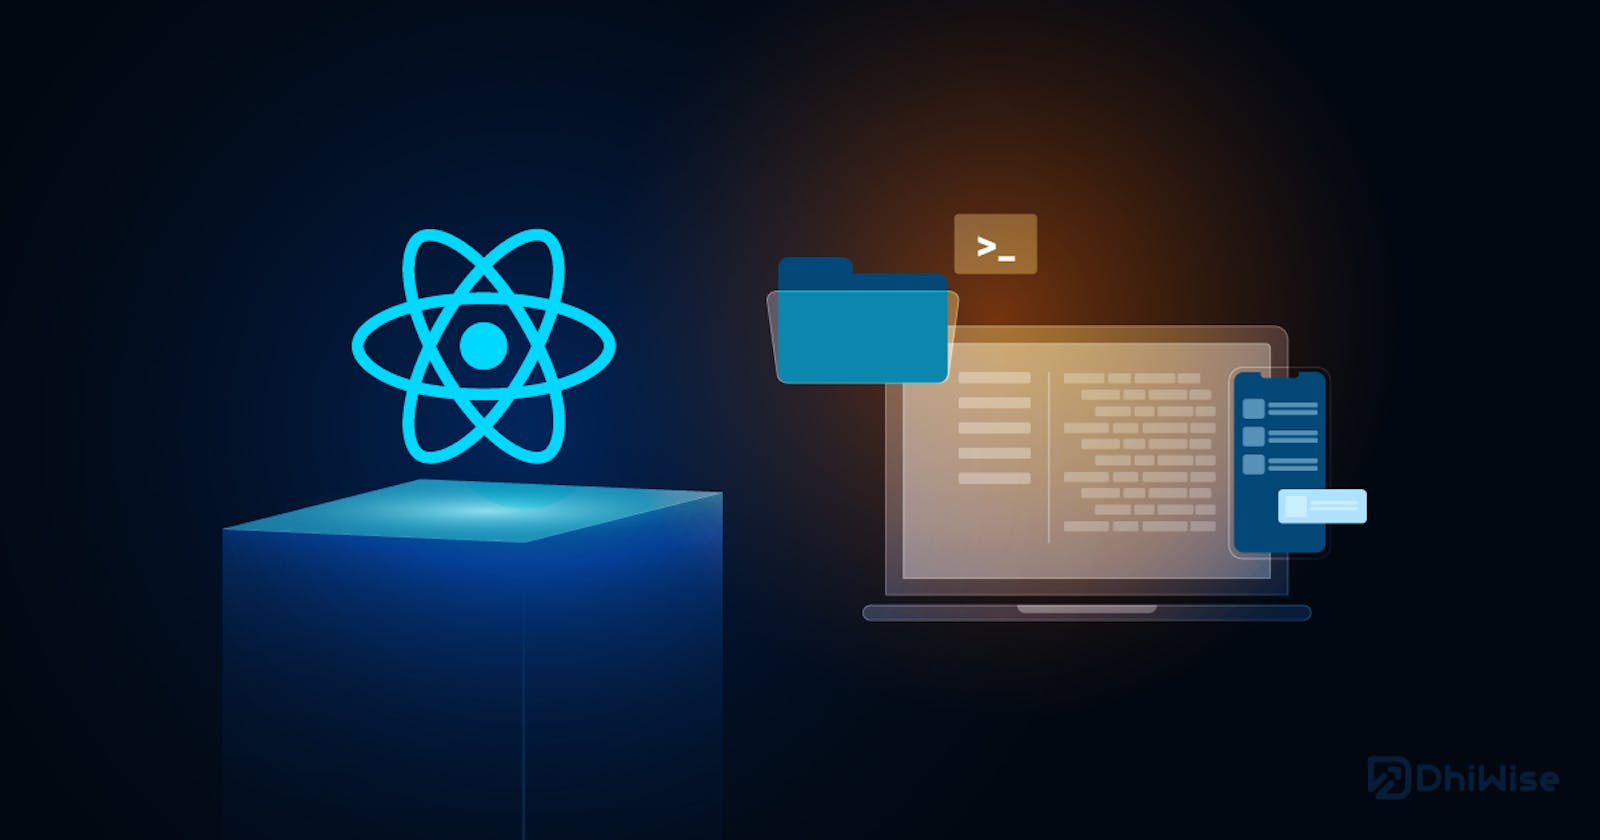 10 Rules for Developing High-Quality React Applications